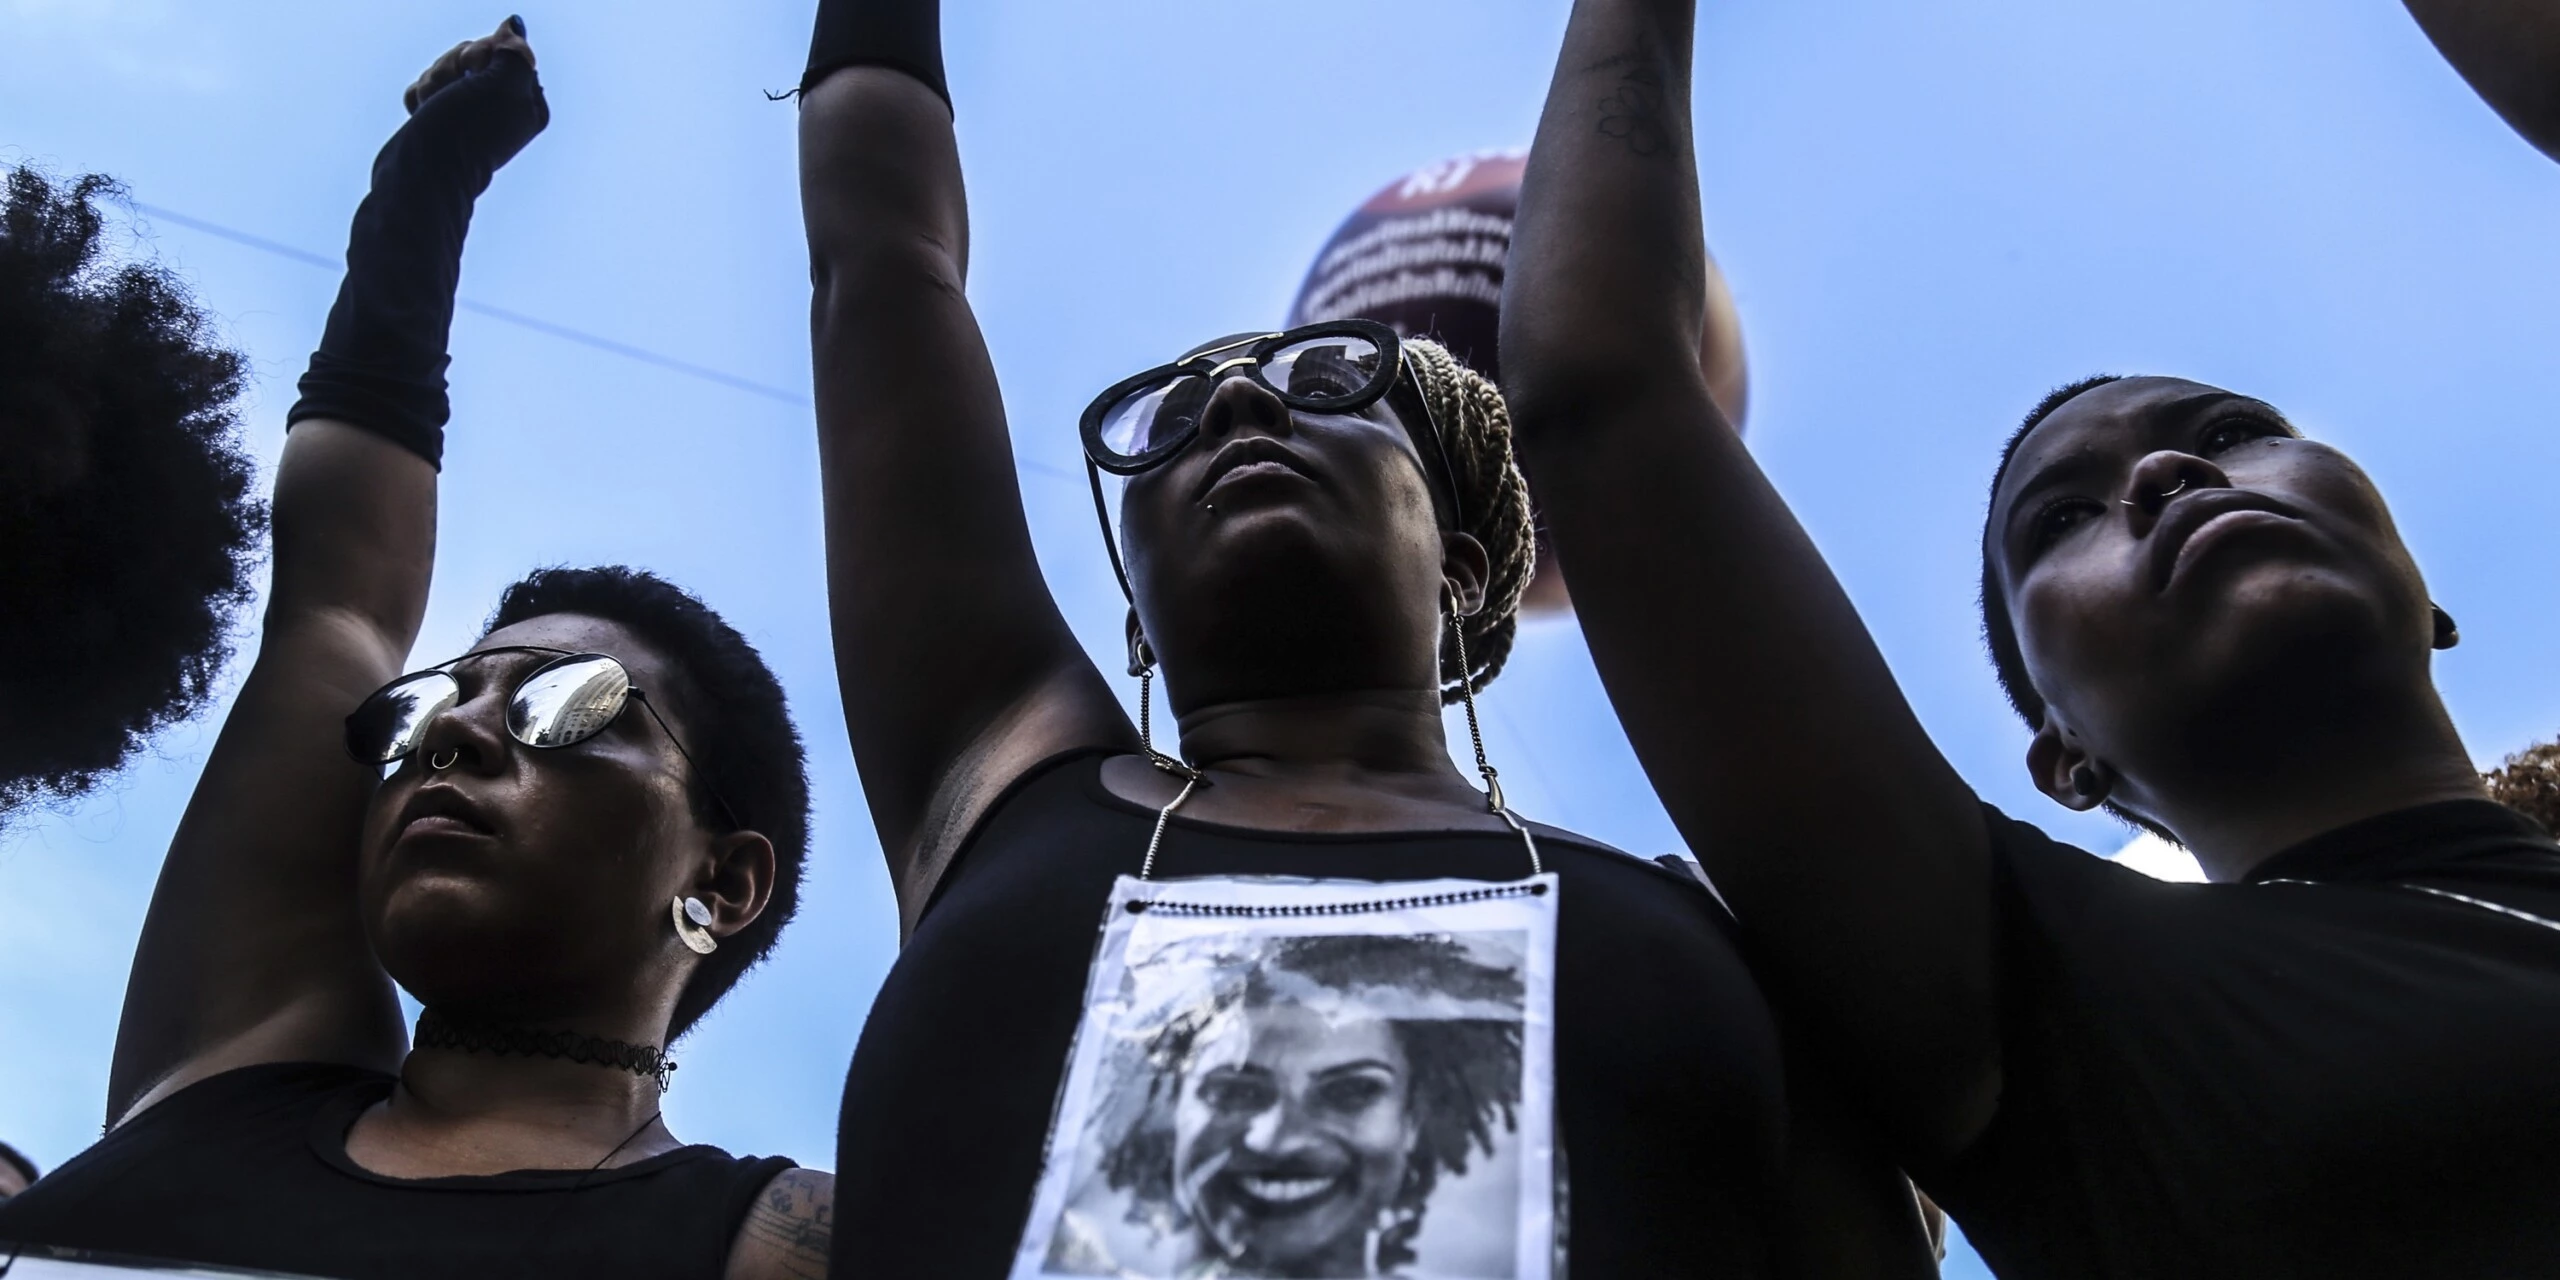 RJ - Rio de Janeiro - 03/15/2018 - Vel river of the councilwoman Marielle Franco - Women raise their hands in protest of the death of Marielle. The morning of this Thursday (15) in Cinel India, the wake of the councilwoman Marielle Franco, who was murdered last night in the center of Rio, after reporting abuses committed by police officers in Acari. Photo: Ian Cheibub / AGIF (via AP)